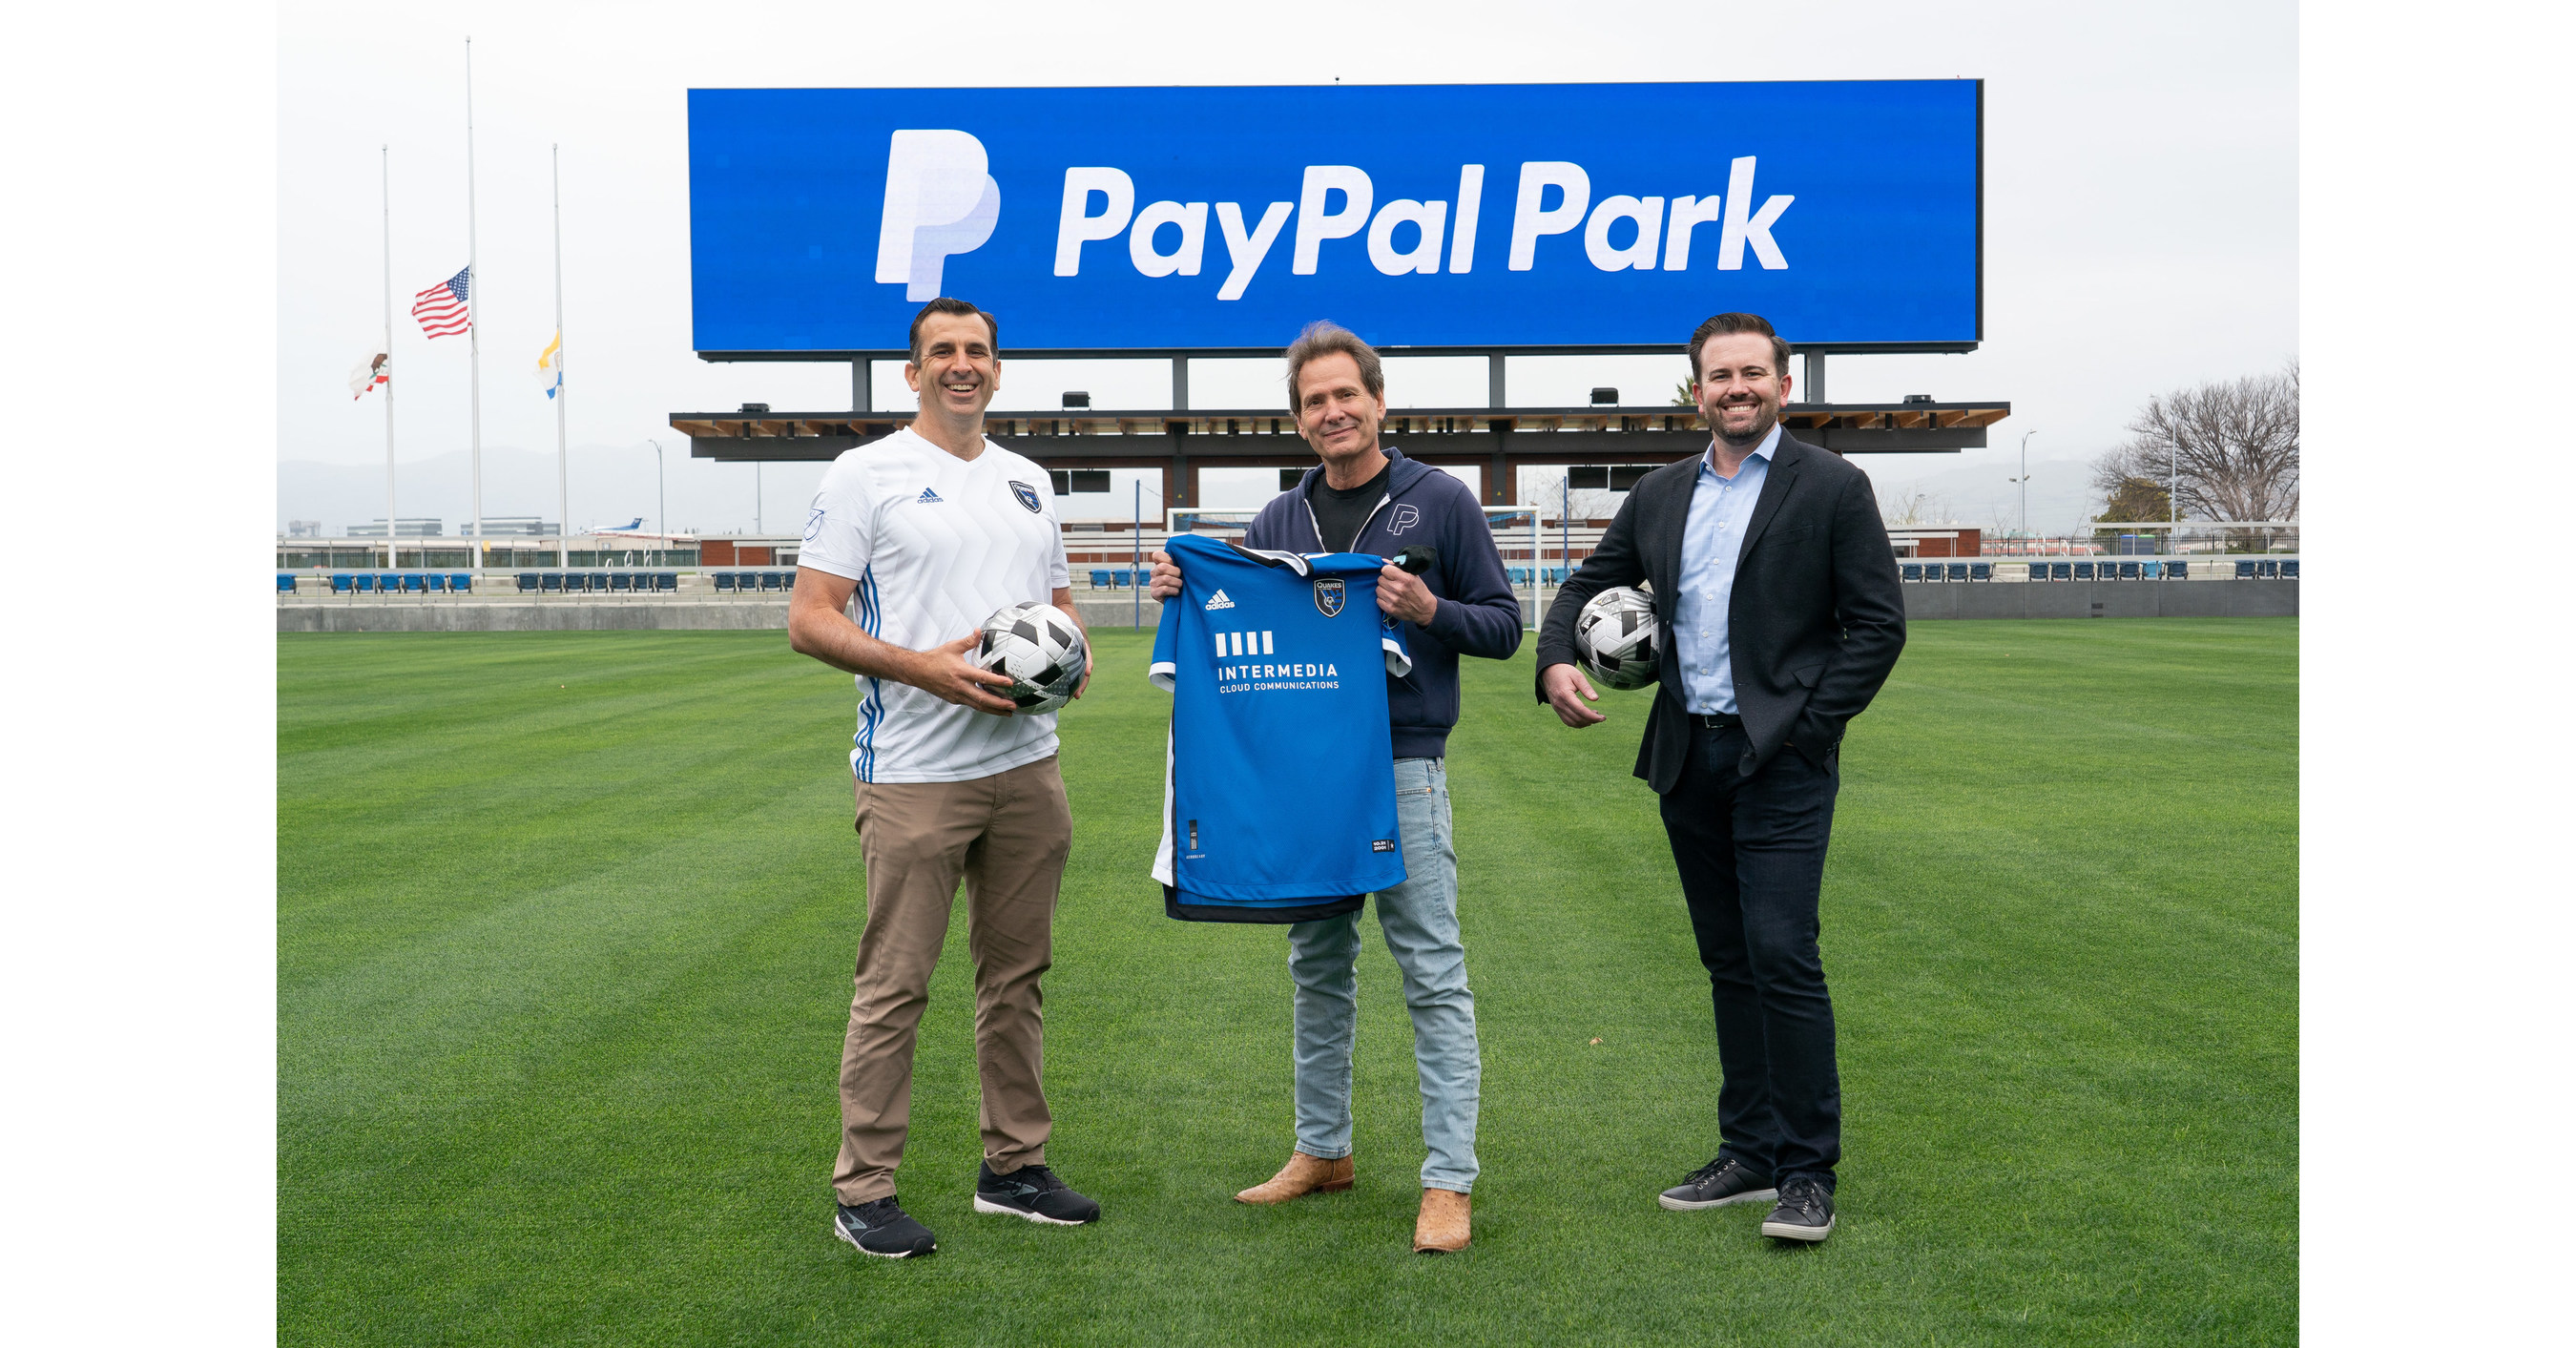 NEWS: Earthquakes to Face C.D. Olimpia in a Friendly Match on October 14 at  PayPal Park